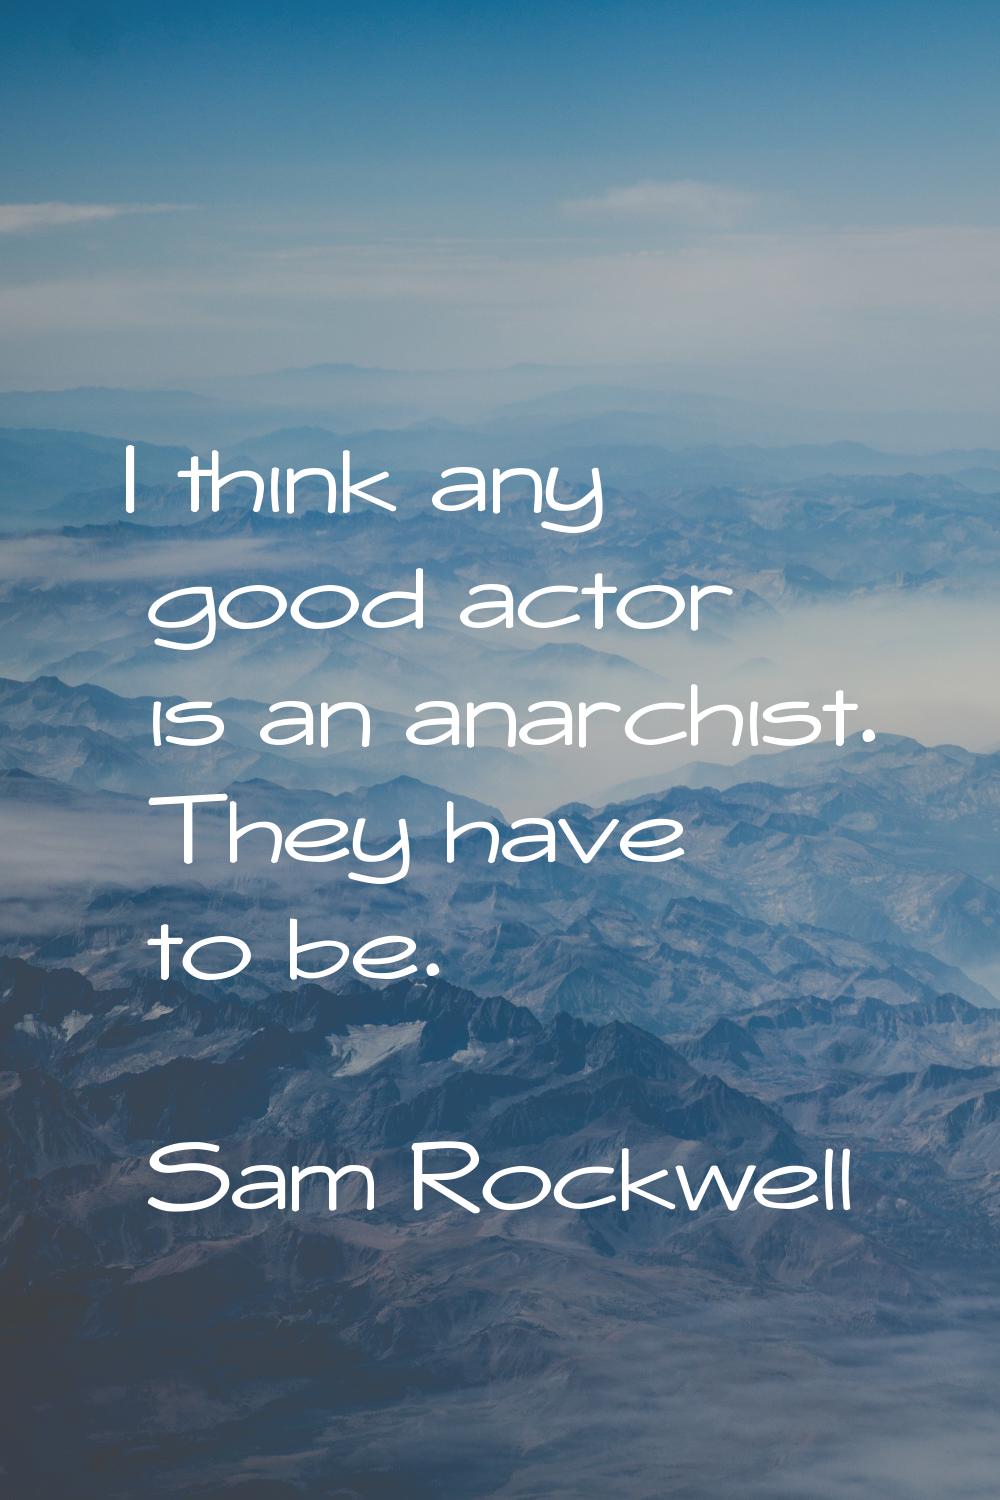 I think any good actor is an anarchist. They have to be.